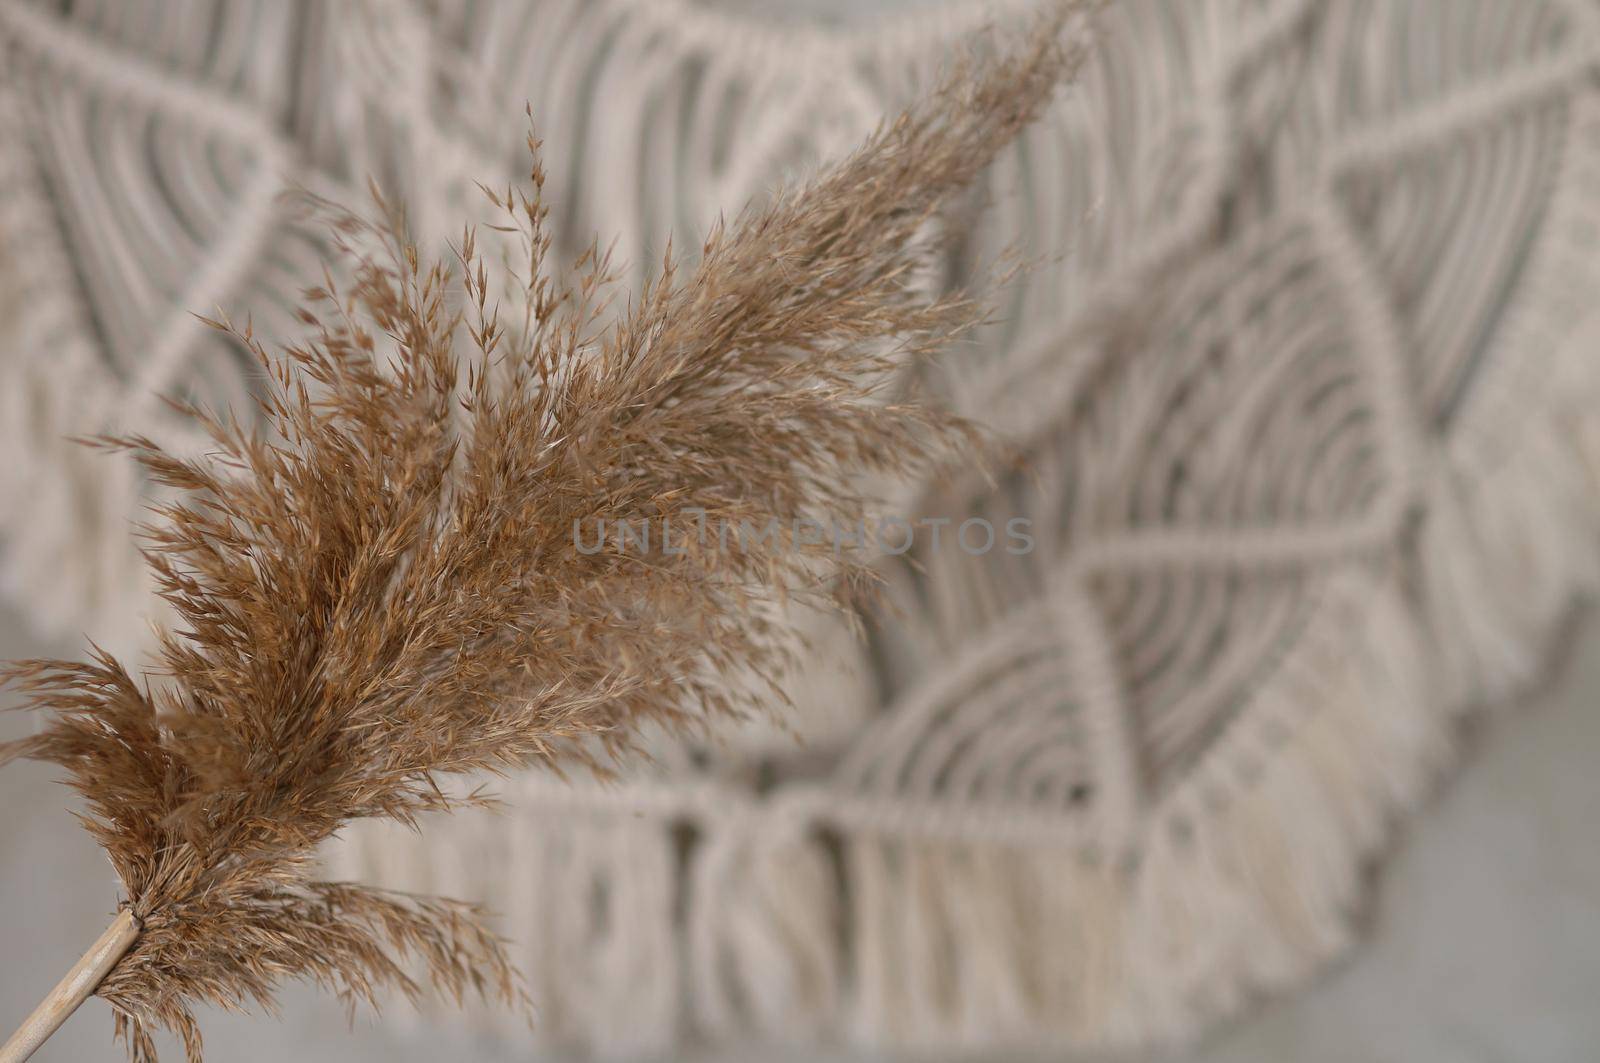 reed plant against a white brick wall background out of focus